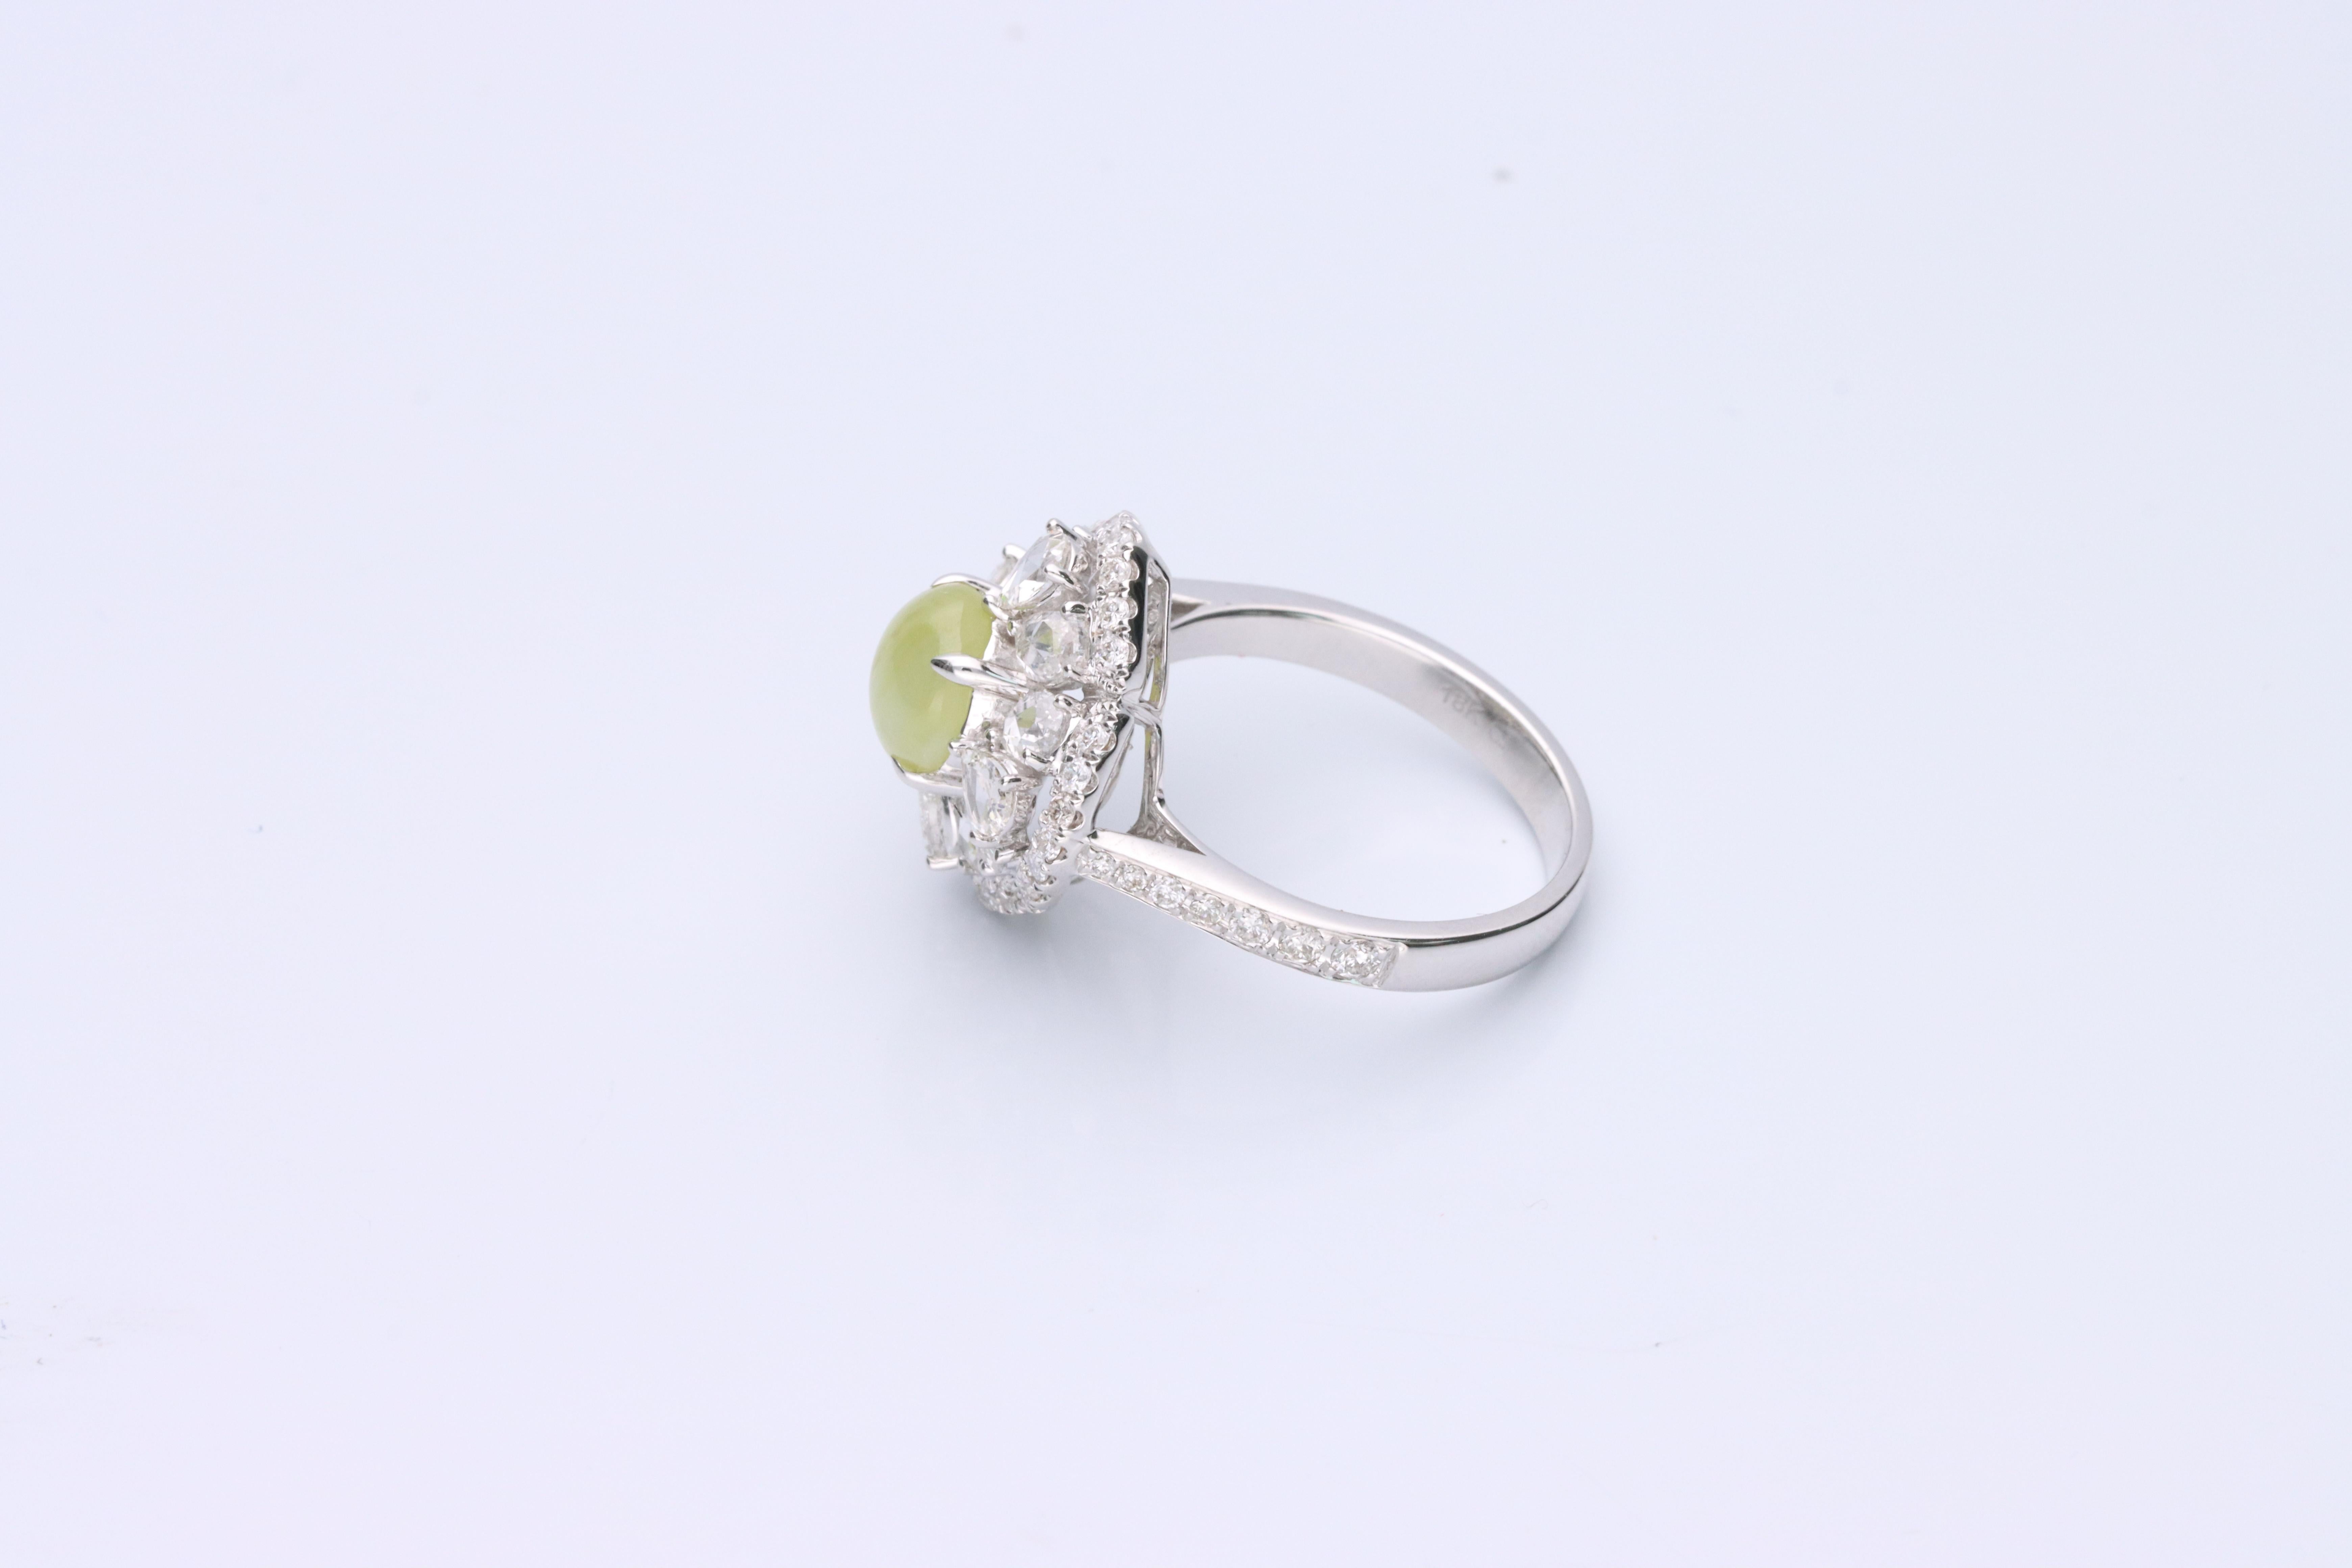 Decorate yourself in elegance with this Ring is crafted from 18-karat White Gold by Gin & Grace. This Ring is made up of Oval-Cab (1 pcs) 1.96 carat Chrysoberyl Cats Eye and Rose-cut White Diamond (12 Pcs) 1.06 Carat, Round-cut White Diamond (42